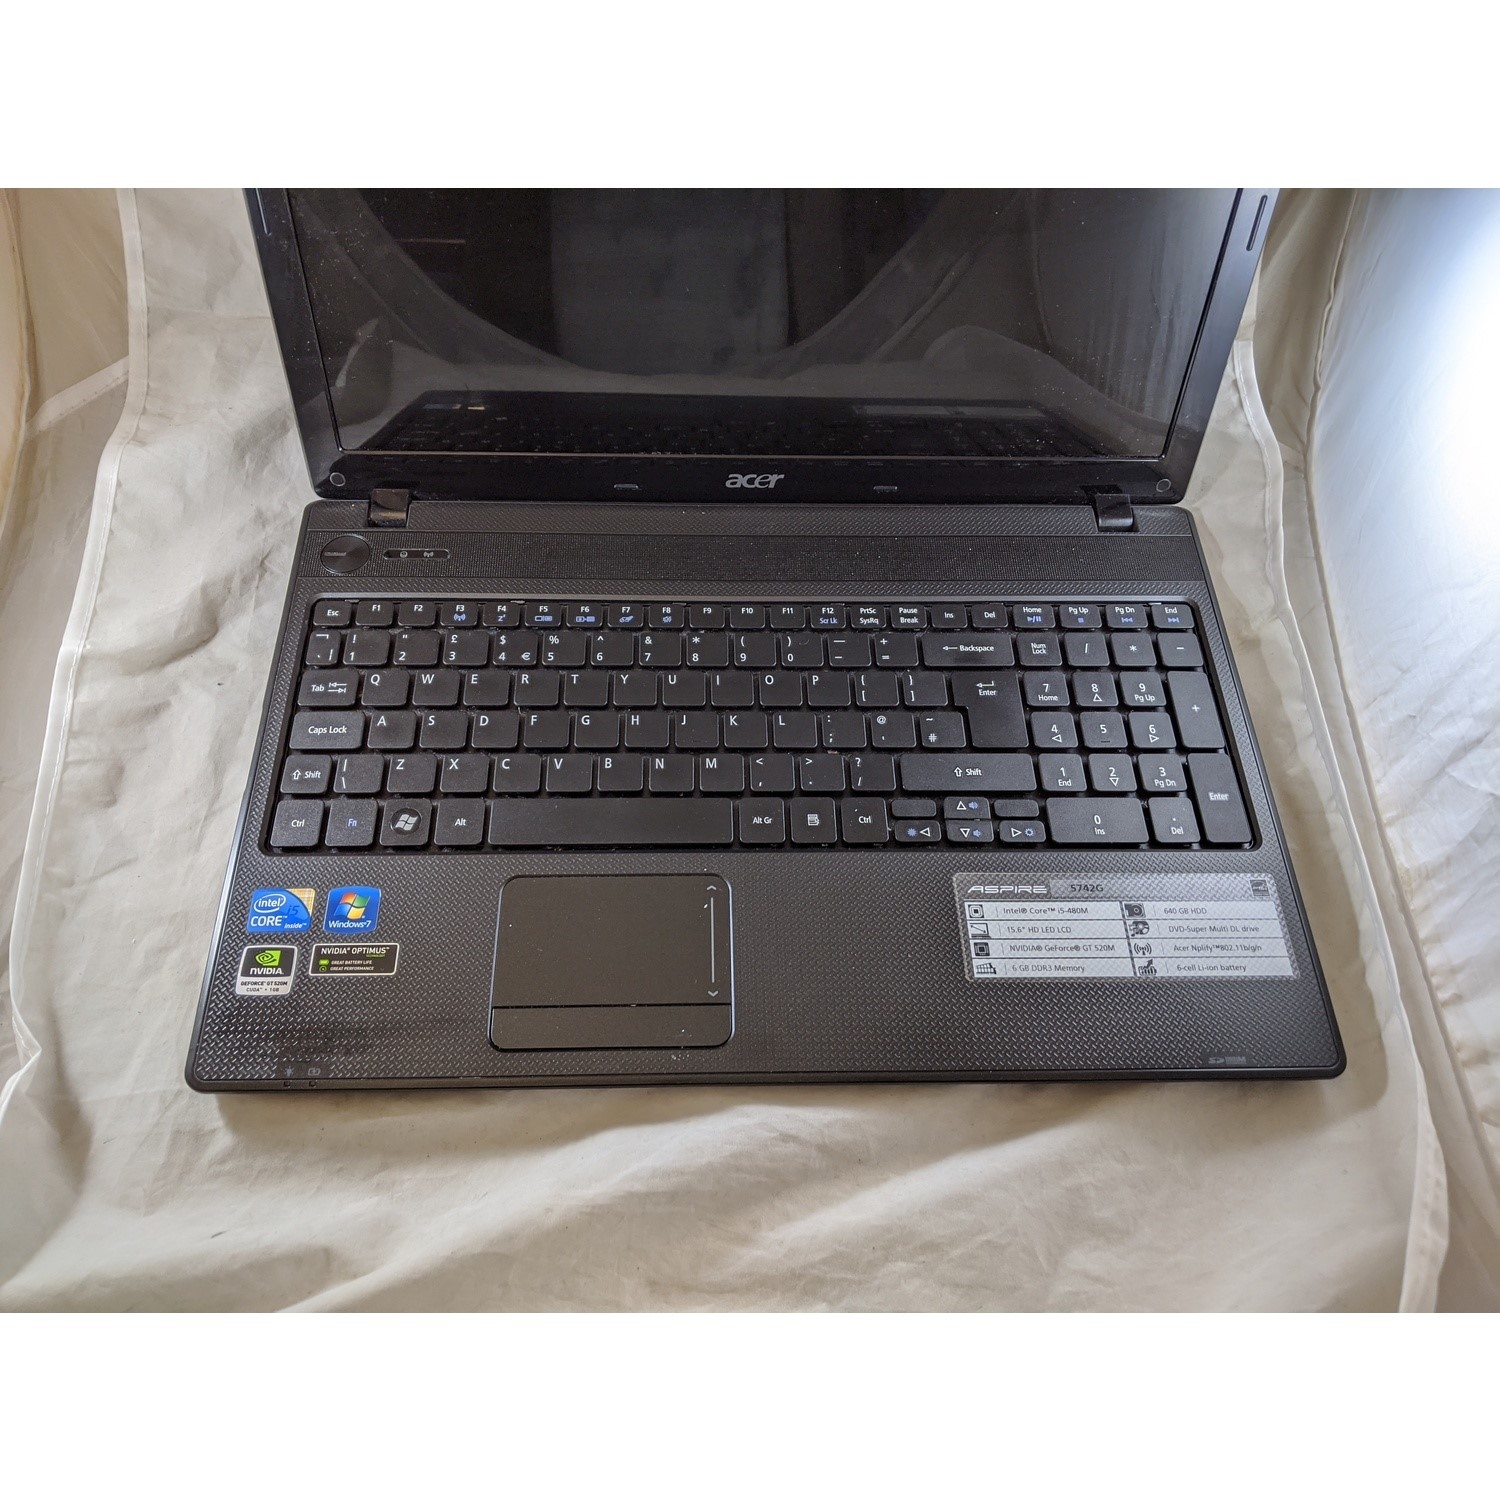 role excitation is enough Refurbished Acer Aspire 5742G Core i5 M480 8GB 160GB 15.6 inch DVD-RW  Windows 10 Laptop - Laptops Direct